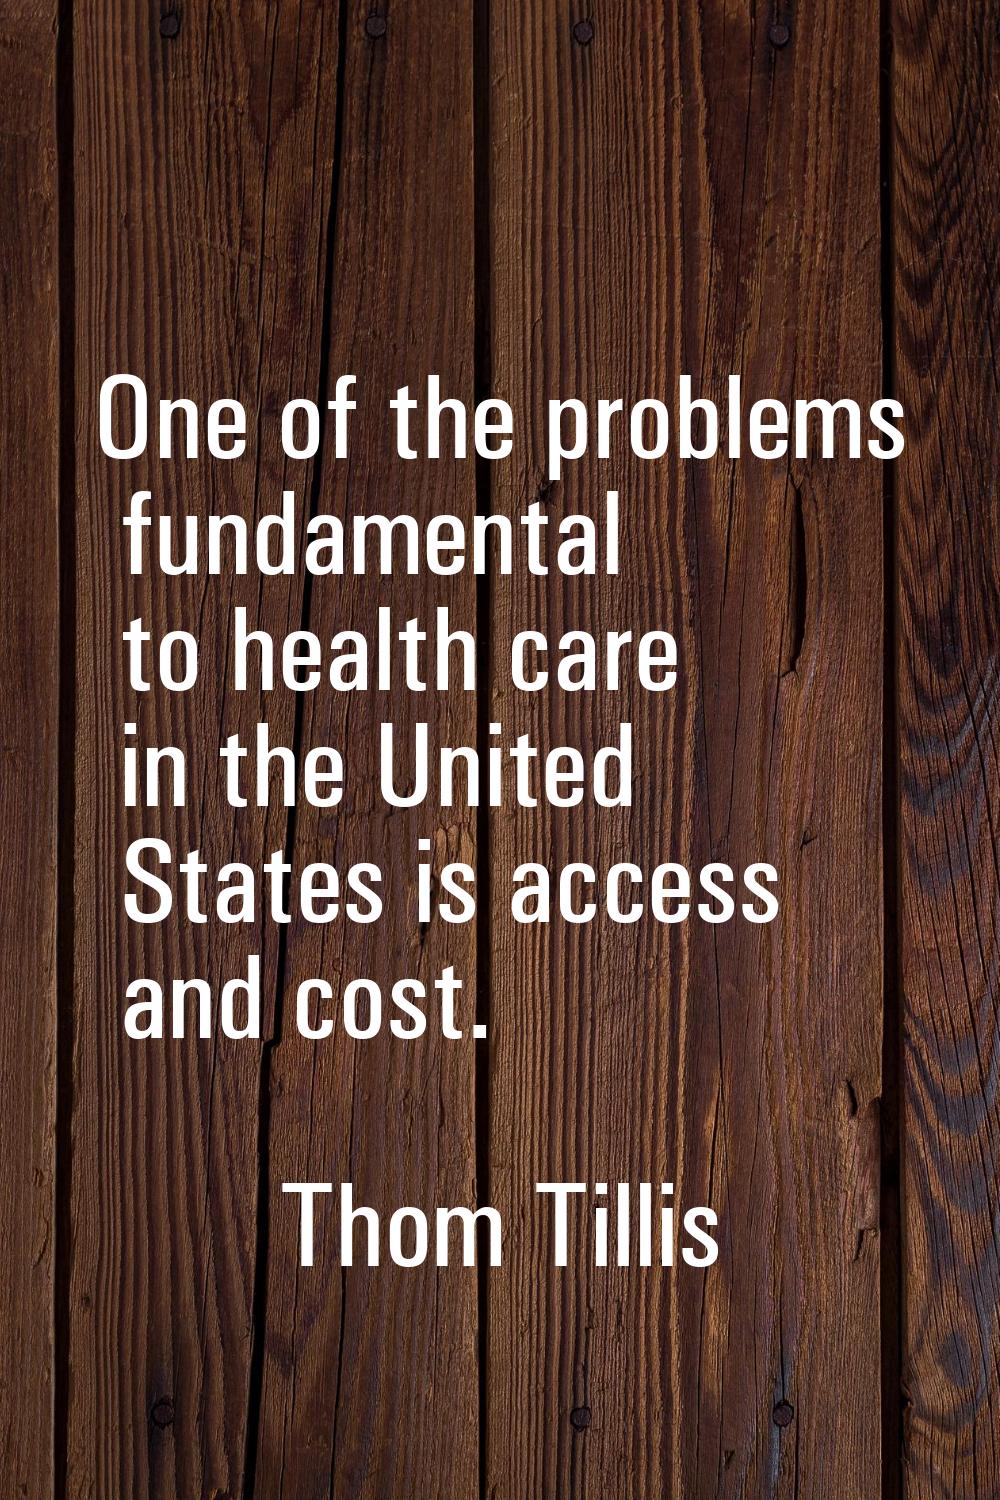 One of the problems fundamental to health care in the United States is access and cost.